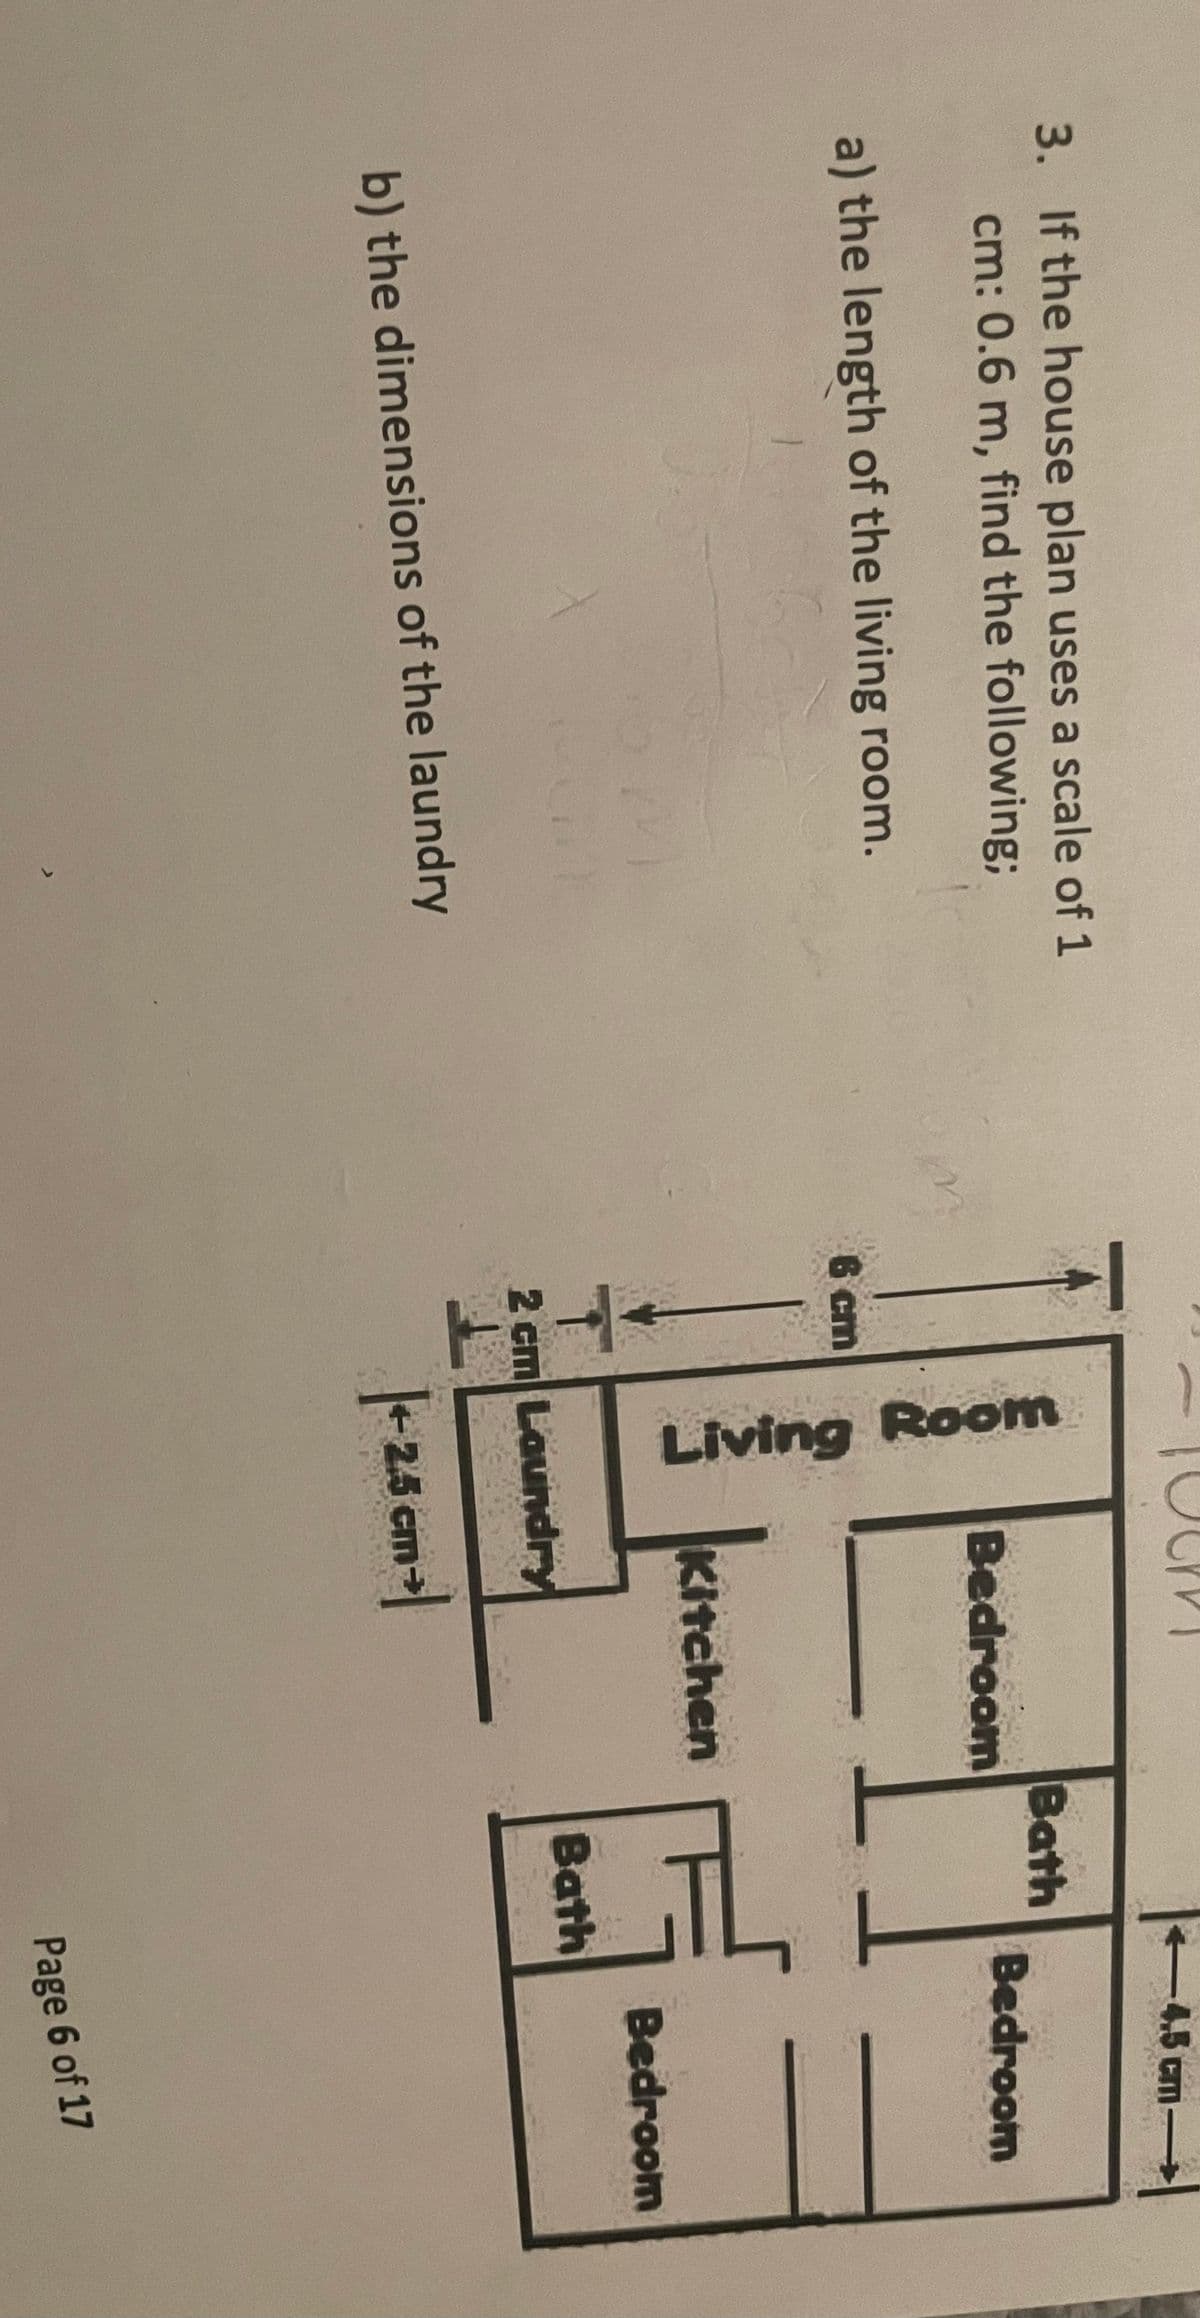 3. If the house plan uses a scale of 1
cm: 0.6 m, find the following;
a) the length of the living room.
6 cm
Living Room
Bedroom
-4.5 cm→
Bath
Bedroom
Kitchen
Bedroom
Bath
b) the dimensions of the laundry
2 cm Laundry
|+2.5 cm -|
Page 6 of 17